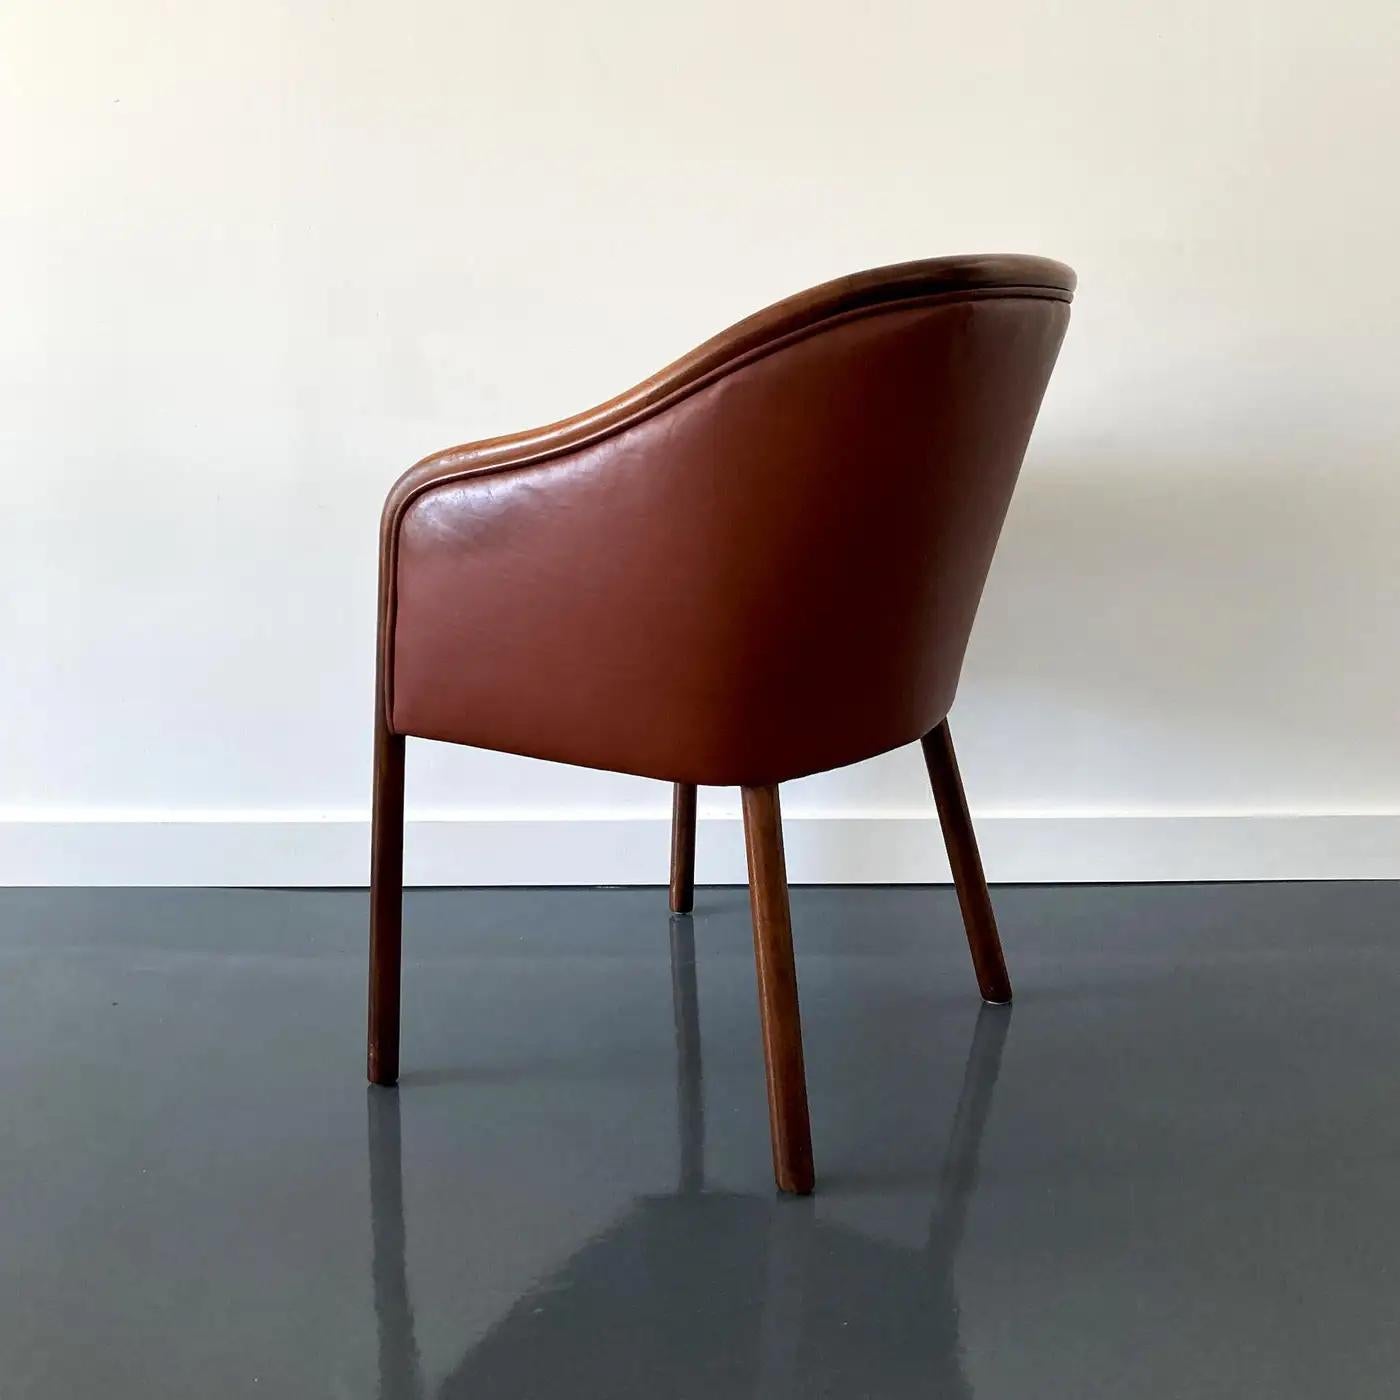 Ward Bennett Brickel Associates Ash & Burgundy Leather Chair, 1970s In Good Condition For Sale In New York, NY